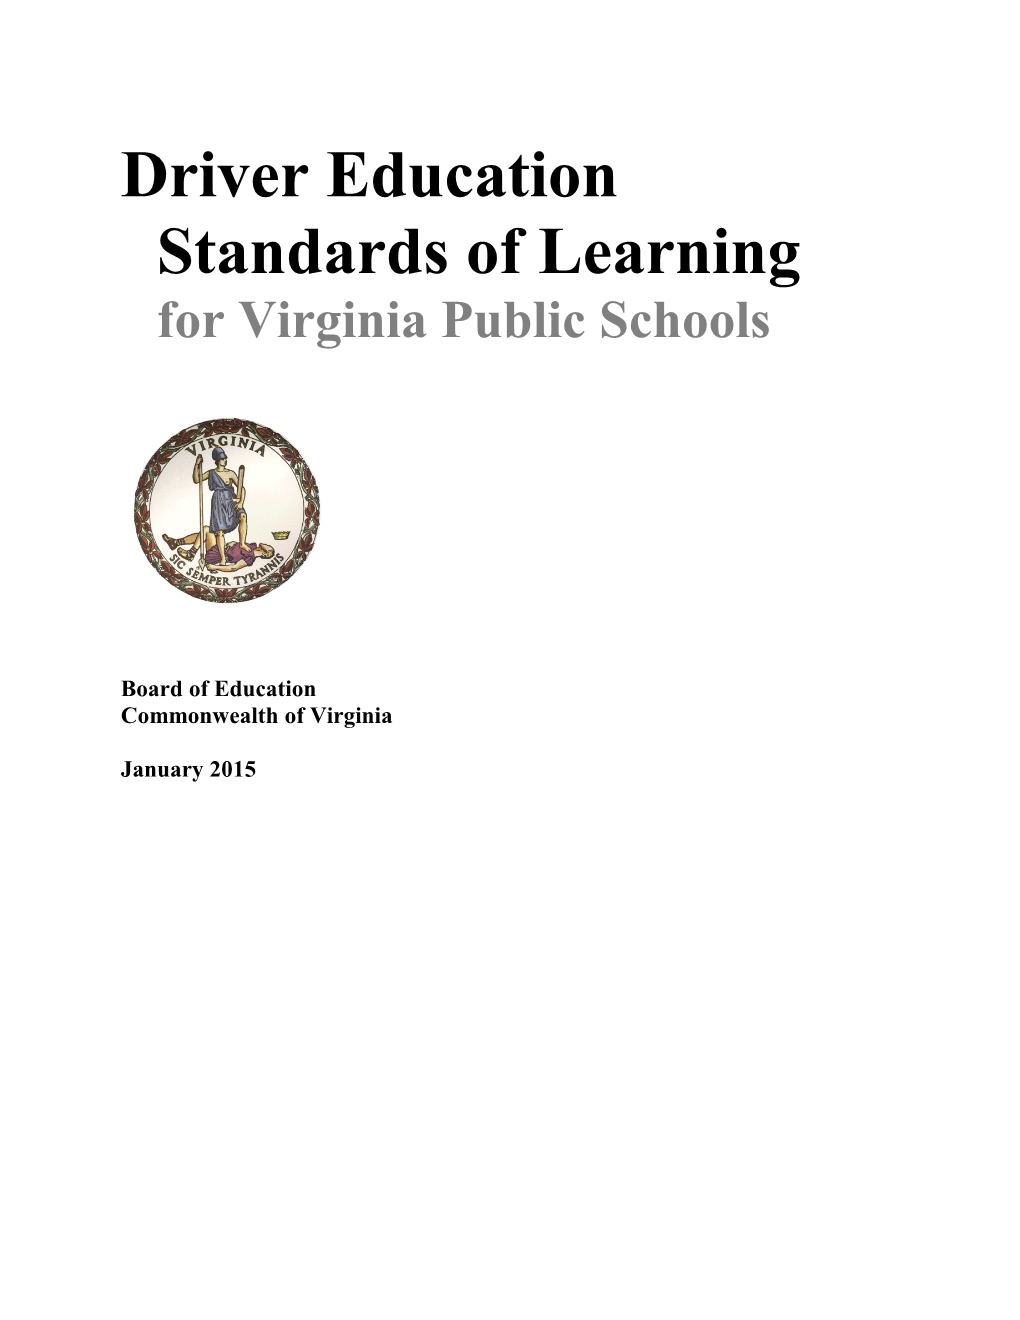 Driver Education Standards of Learning for Virginia Public Schools